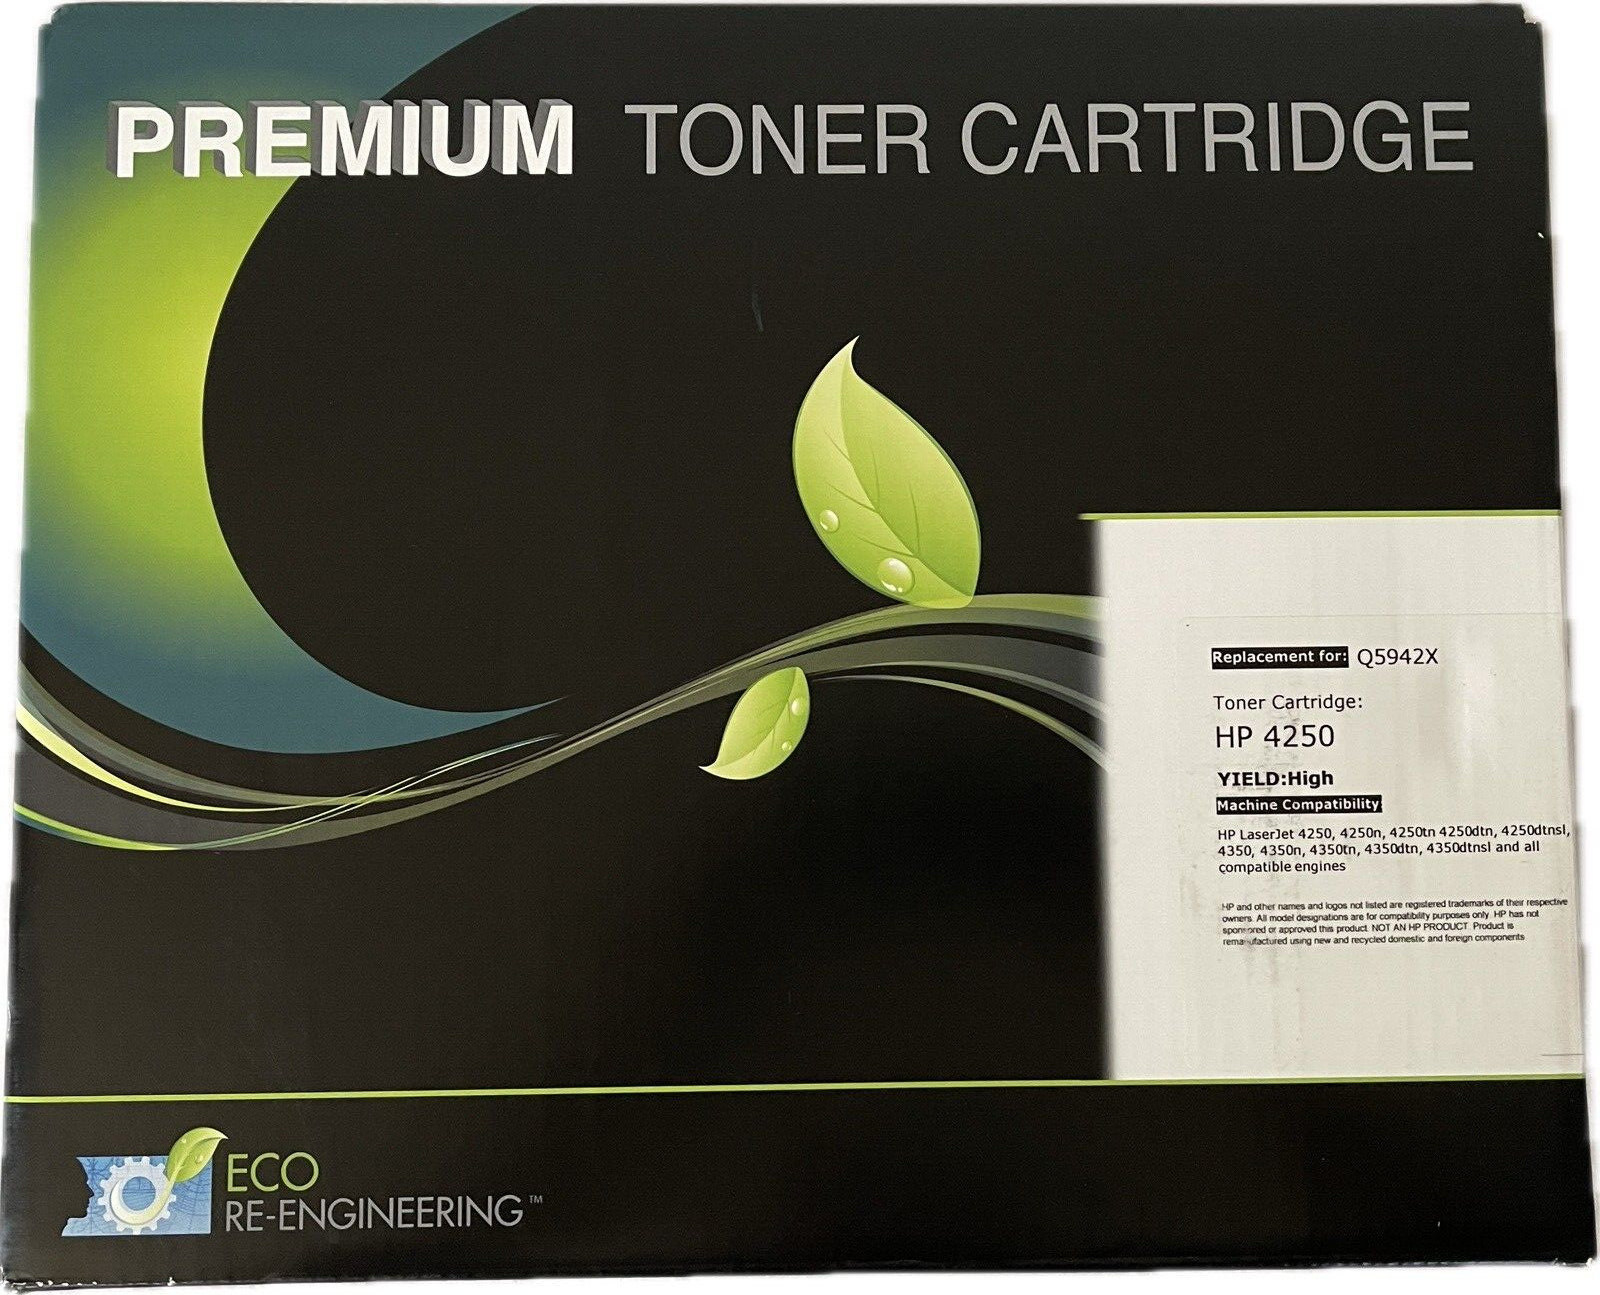 Q5942X Premium Toner High Yield for HP4250/4350 Series Printers Made in USA